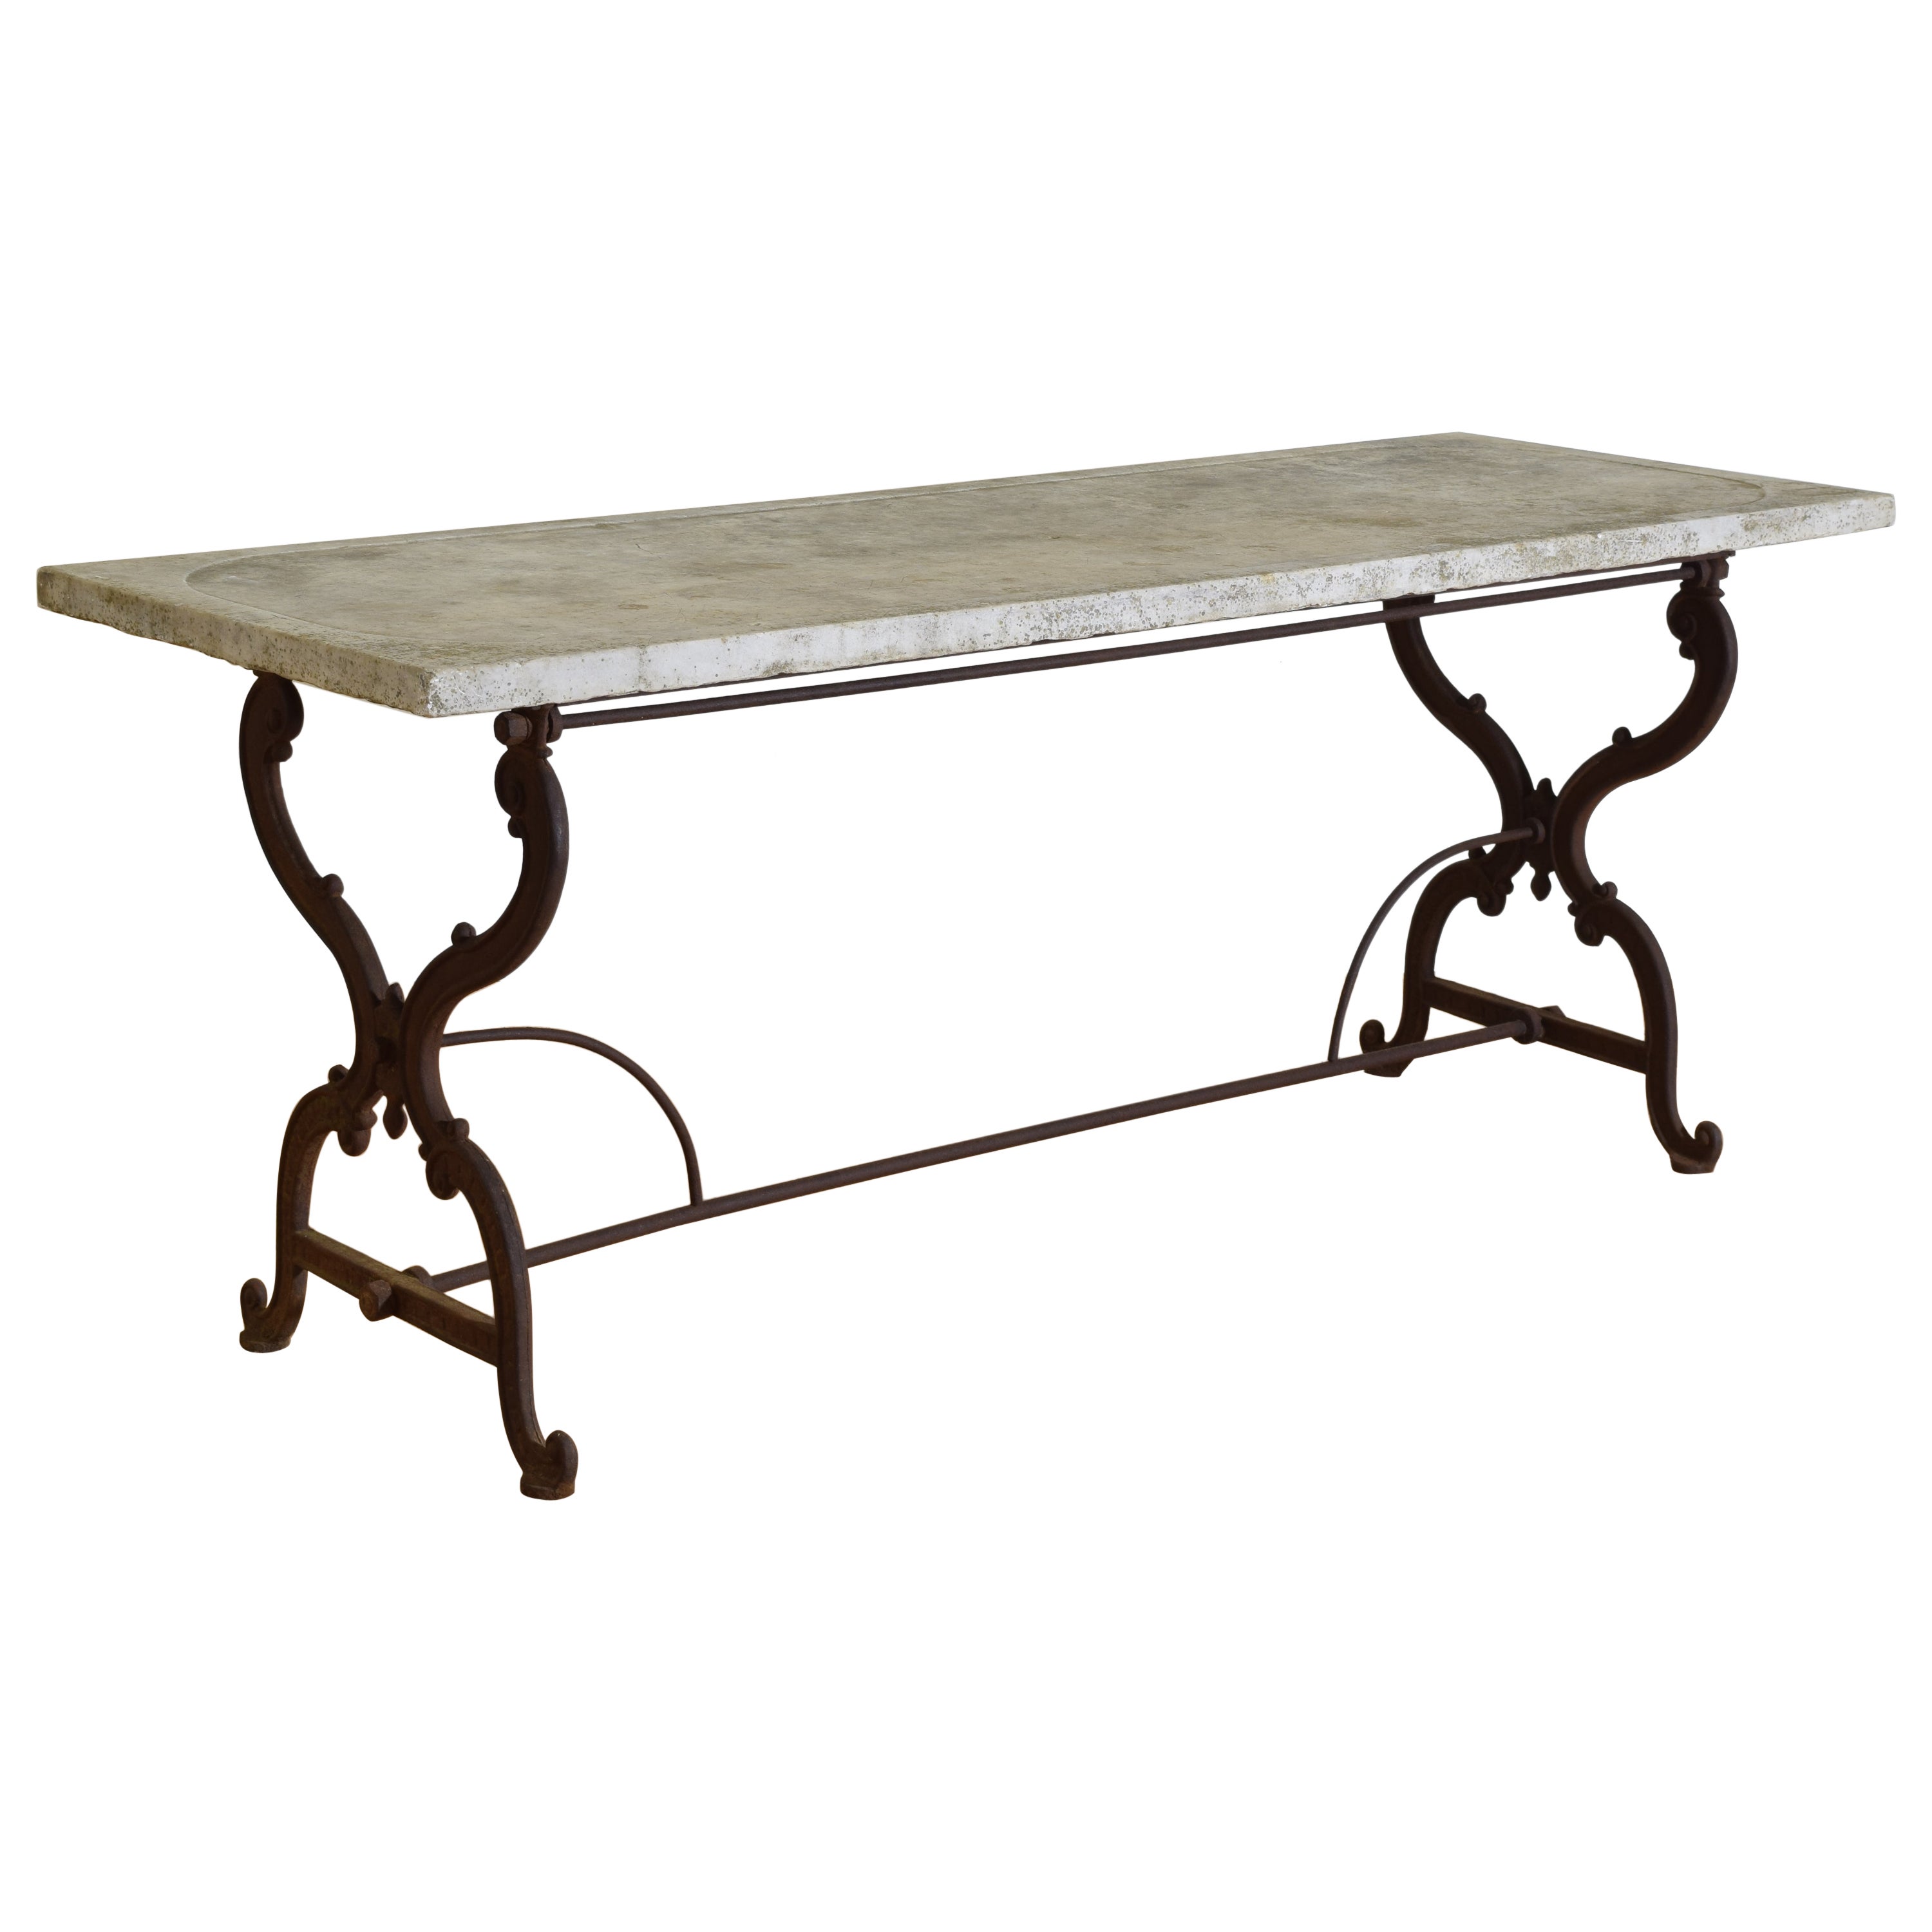 French Late Victorian Wrought Iron & Marble Gardener’s Table, lastq 19th cen. For Sale